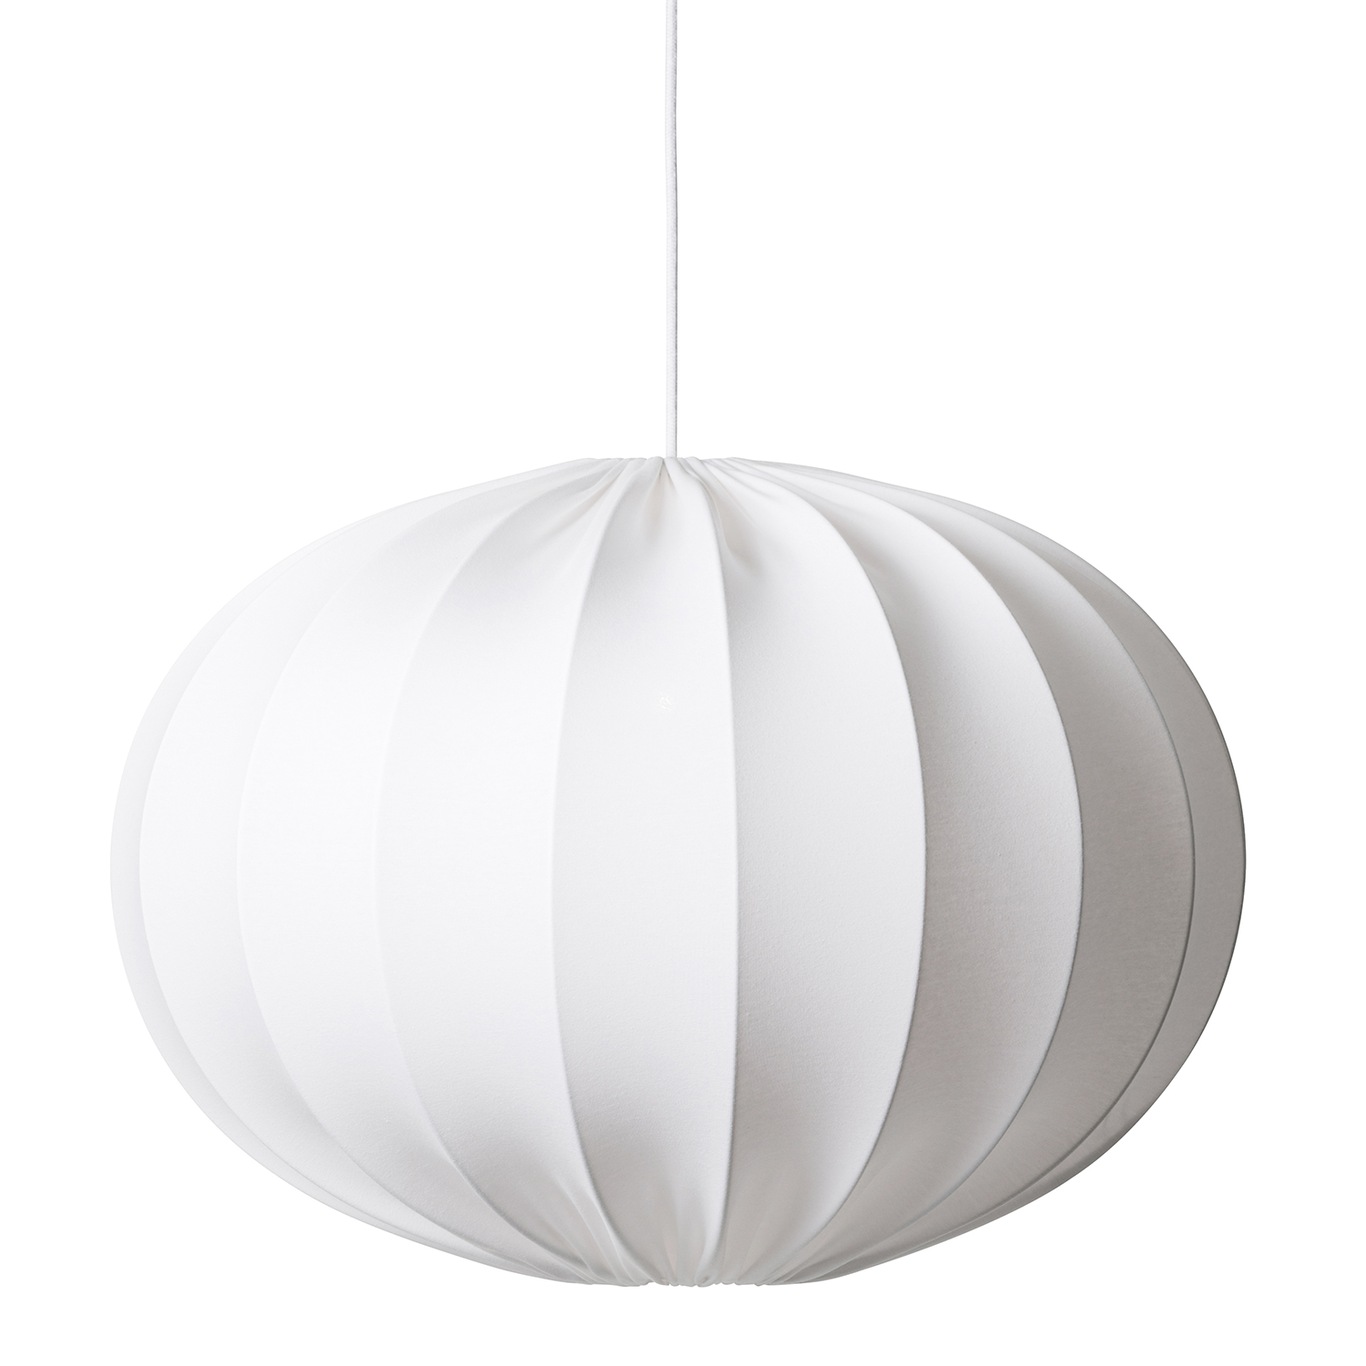 Boll 65 Lampshade Oval, White